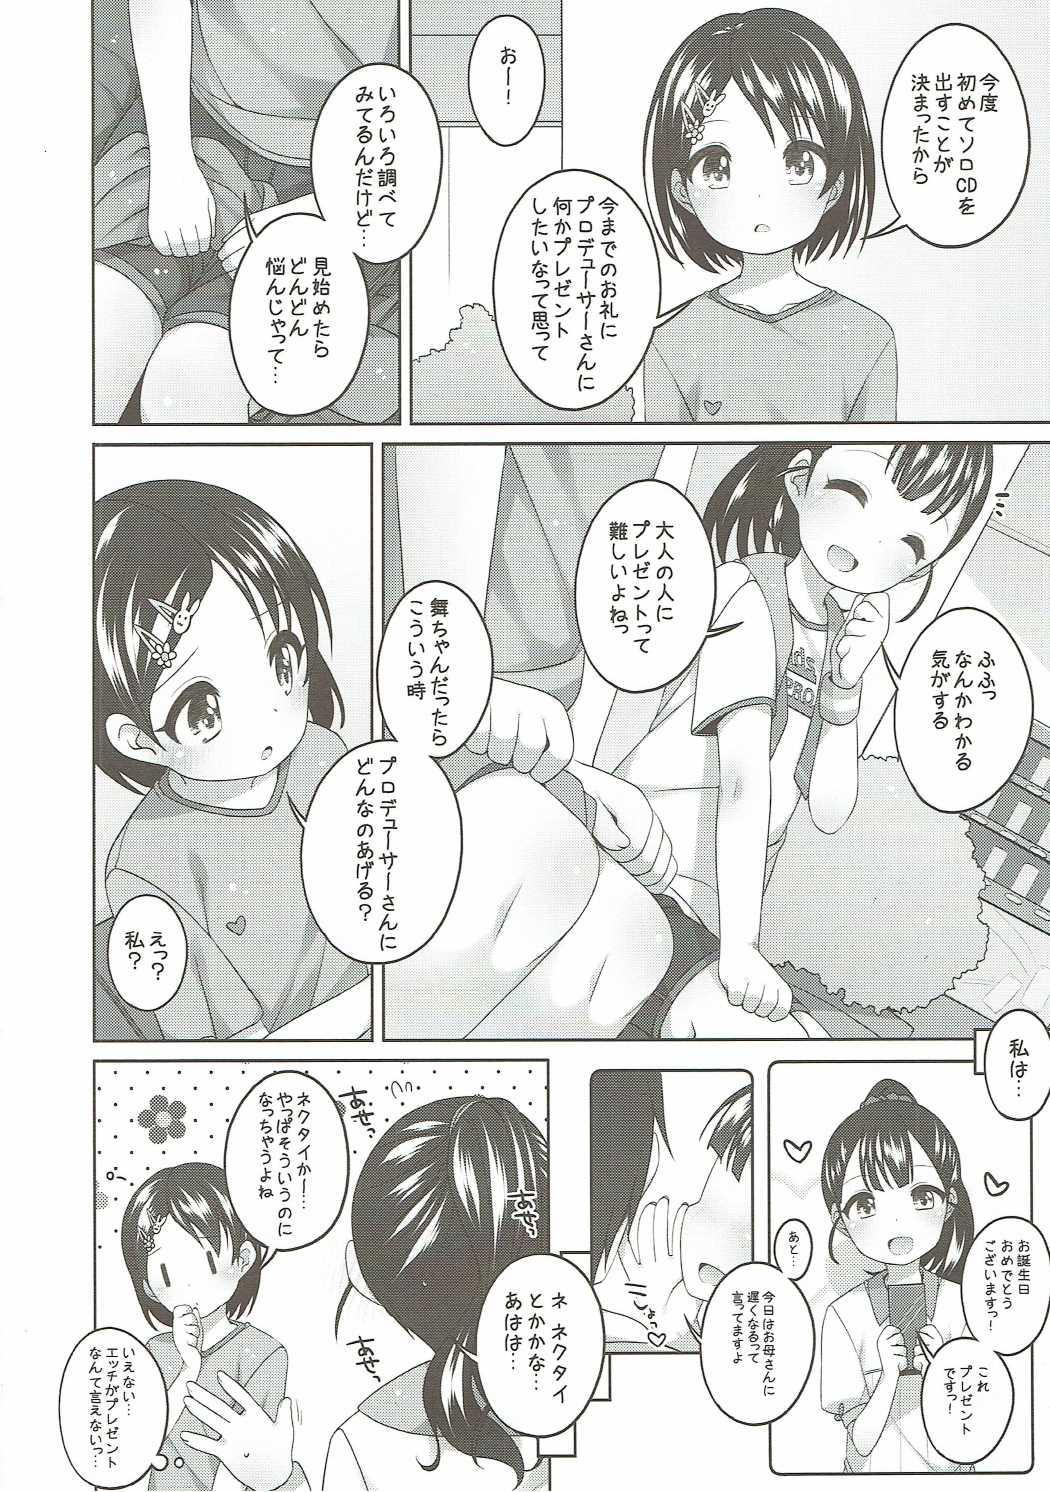 Punk Ganbare! Chie-chan - The idolmaster Perrito - Page 5